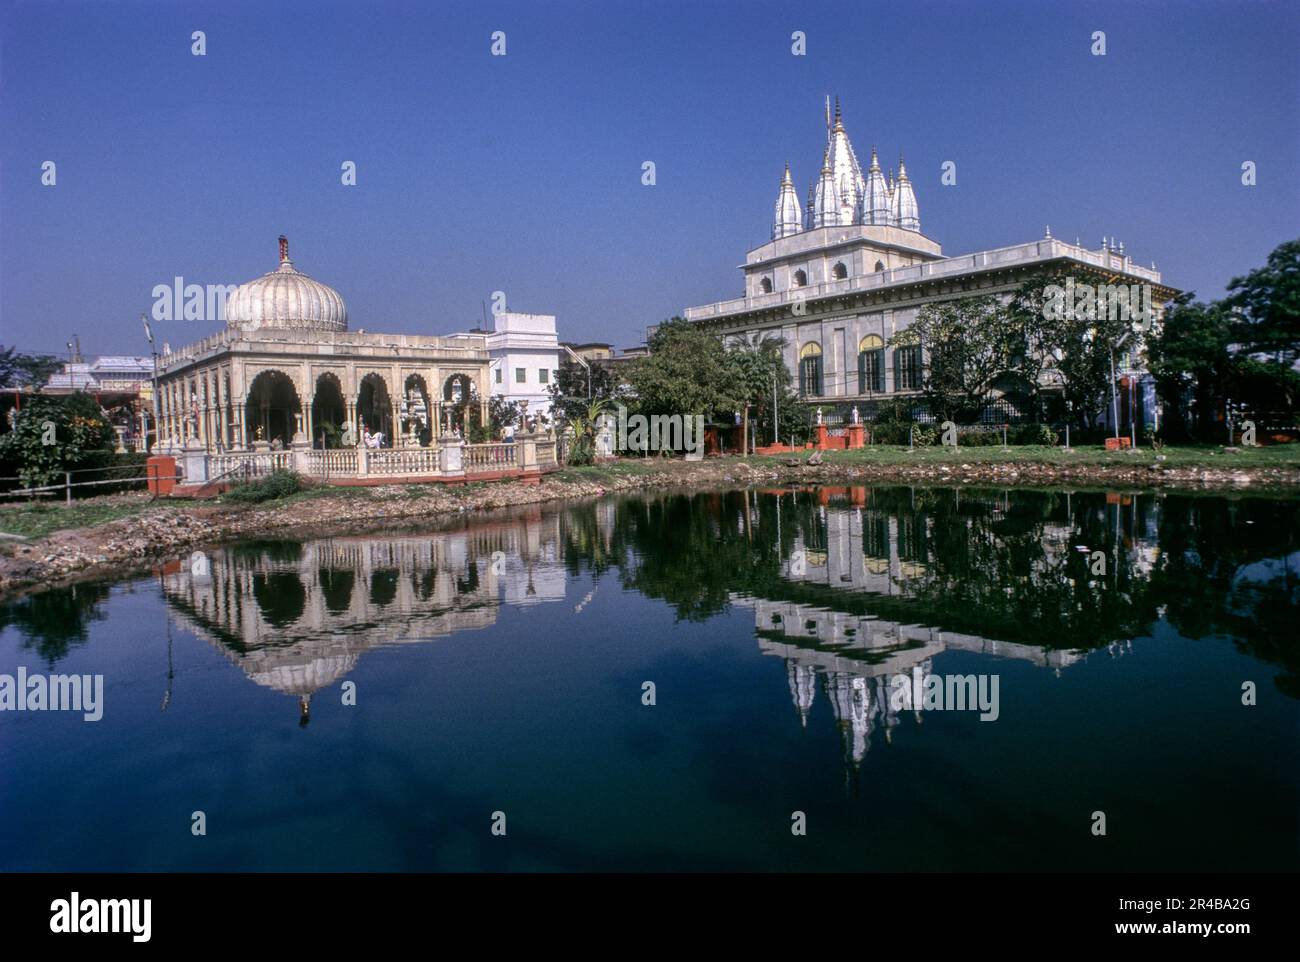 Parshwanath Jain temple with reflection in Kolkata or Calcutta, West Bengal, India, Asia Stock Photo